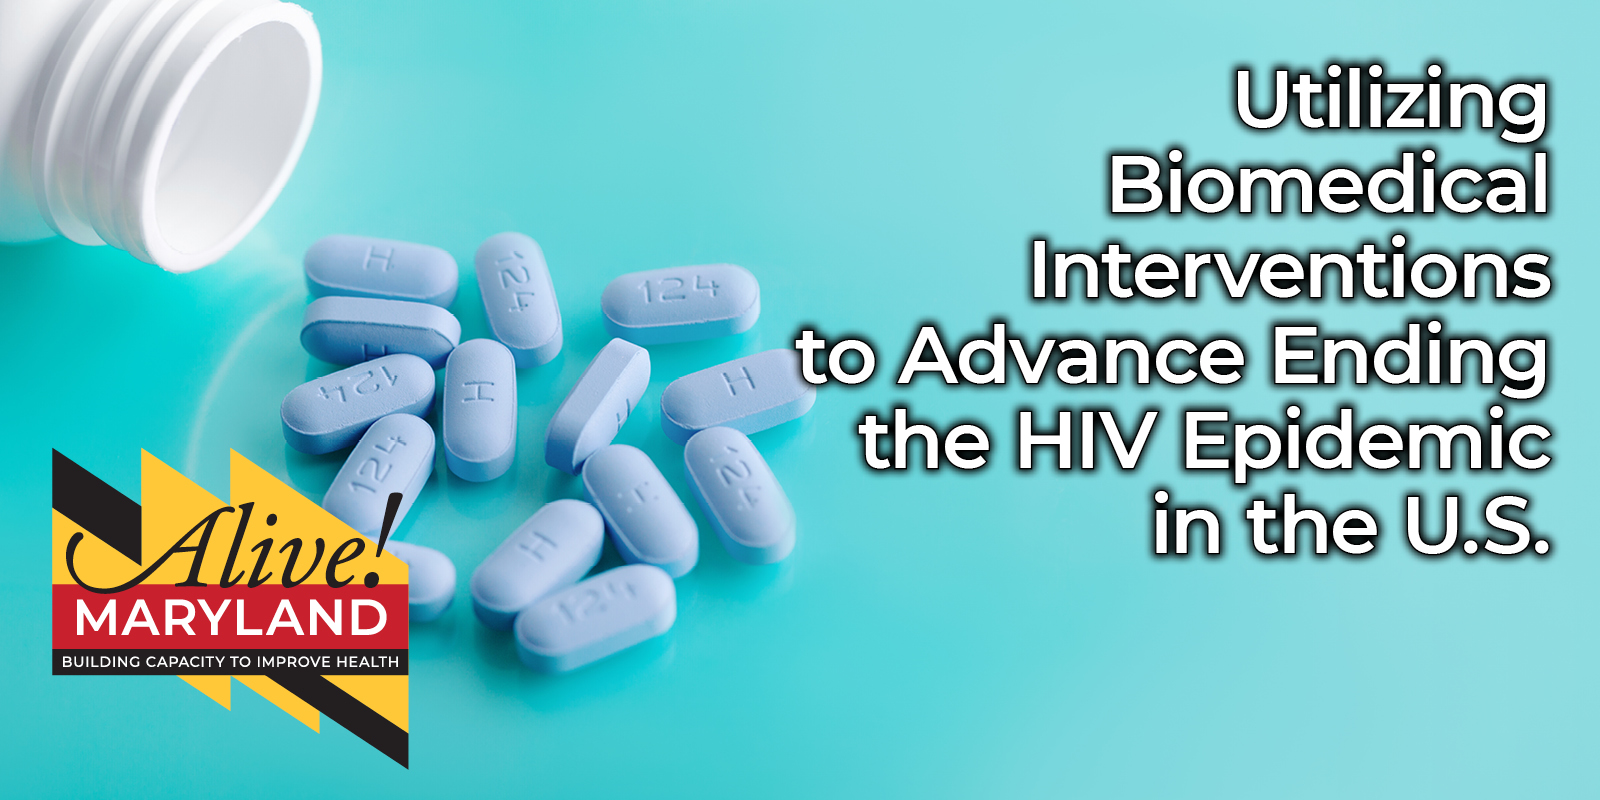 Utilizing Biomedical Interventions to Advance Ending the HIV Epidemic in the US